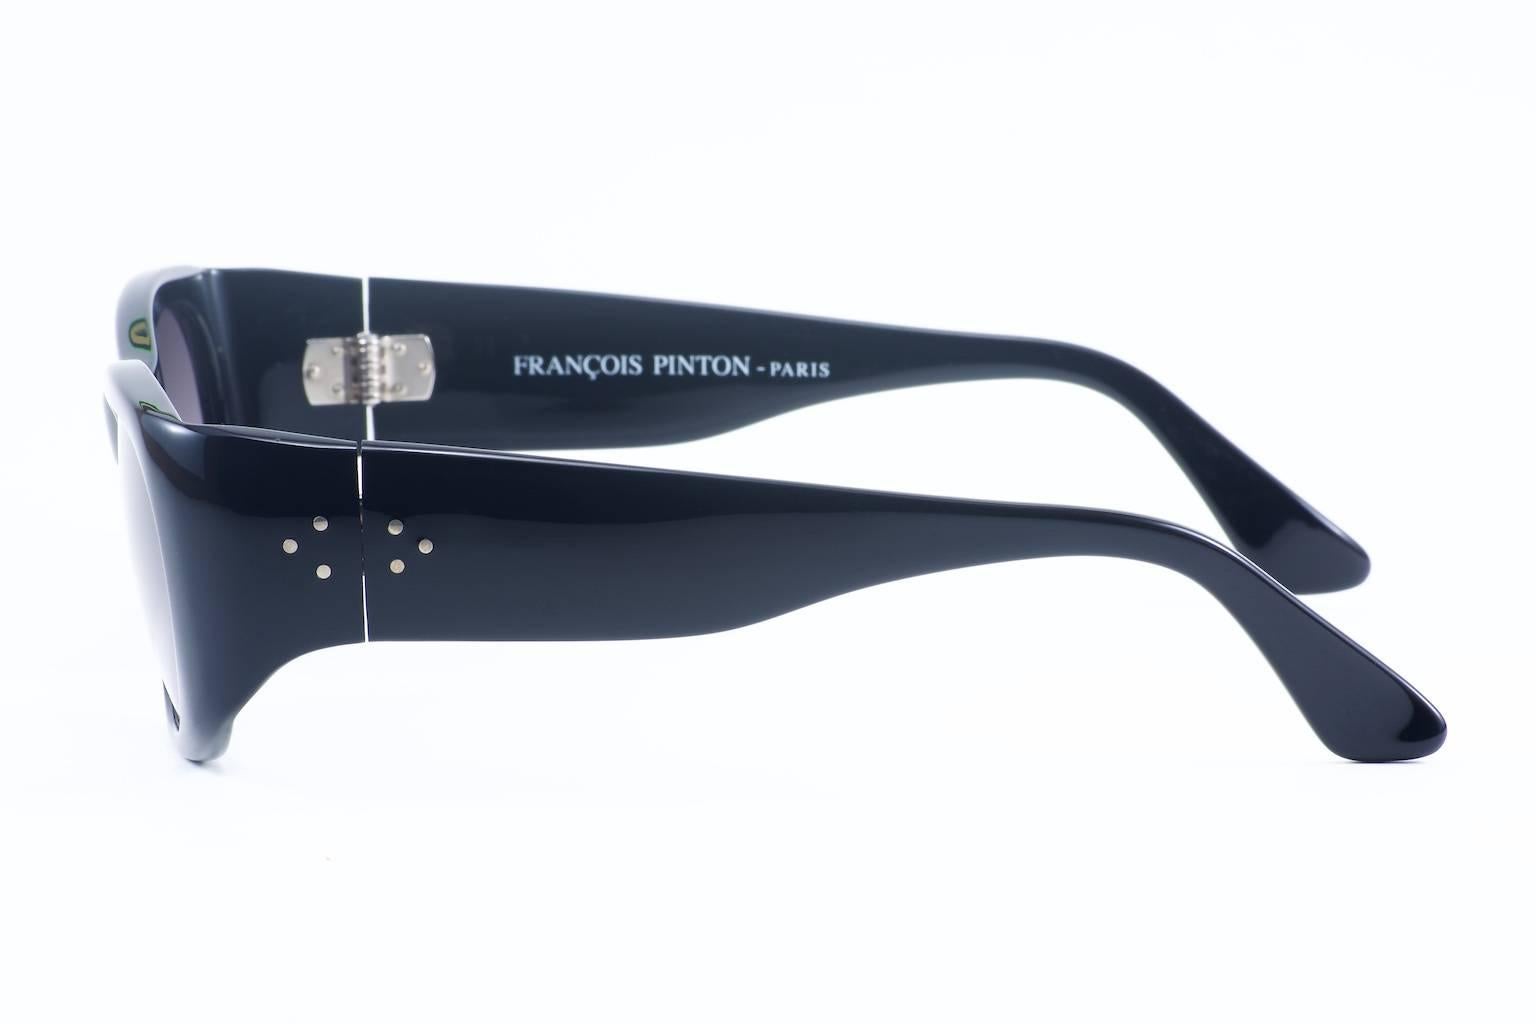 From classic to modern, frame is made with the same impeccable craftsmanship and materials. Infused with the heart of Paris, Francois Pinton frames are simply timeless and meant to last and be worn for a